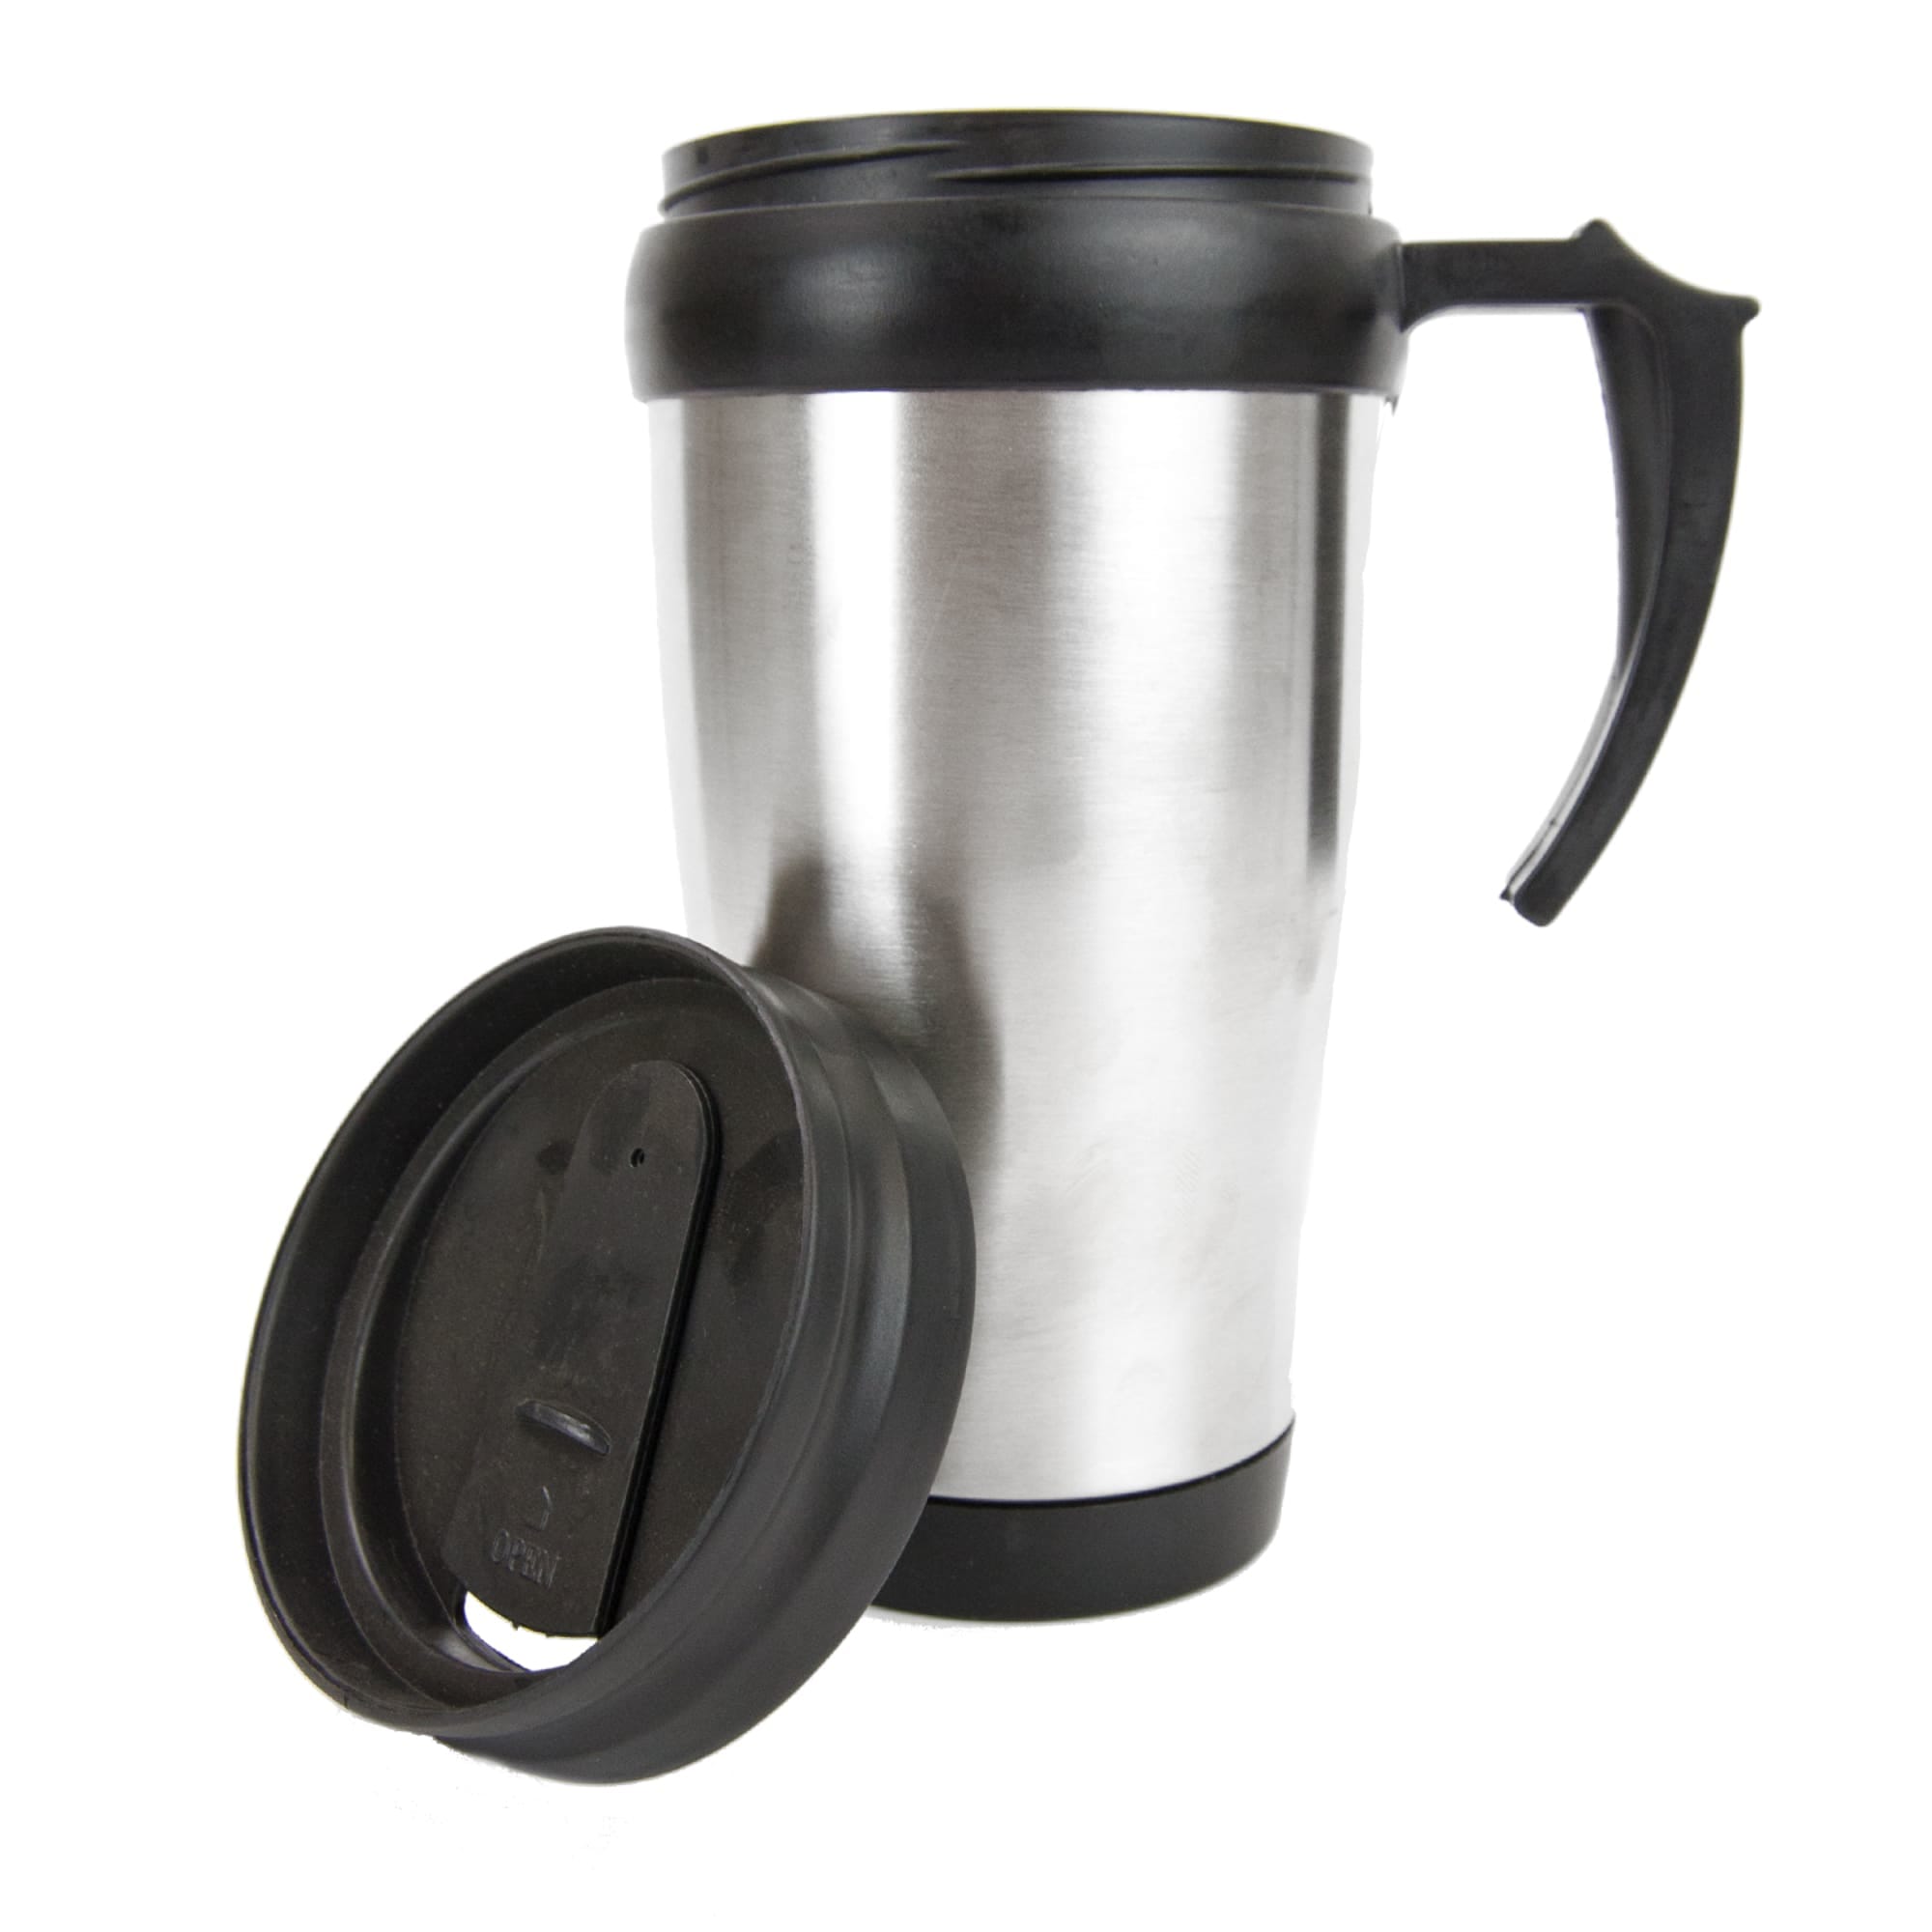 Home Basics 16 oz. Stainless Steel Insulated Travel Mug with Handle $3.00 EACH, CASE PACK OF 24